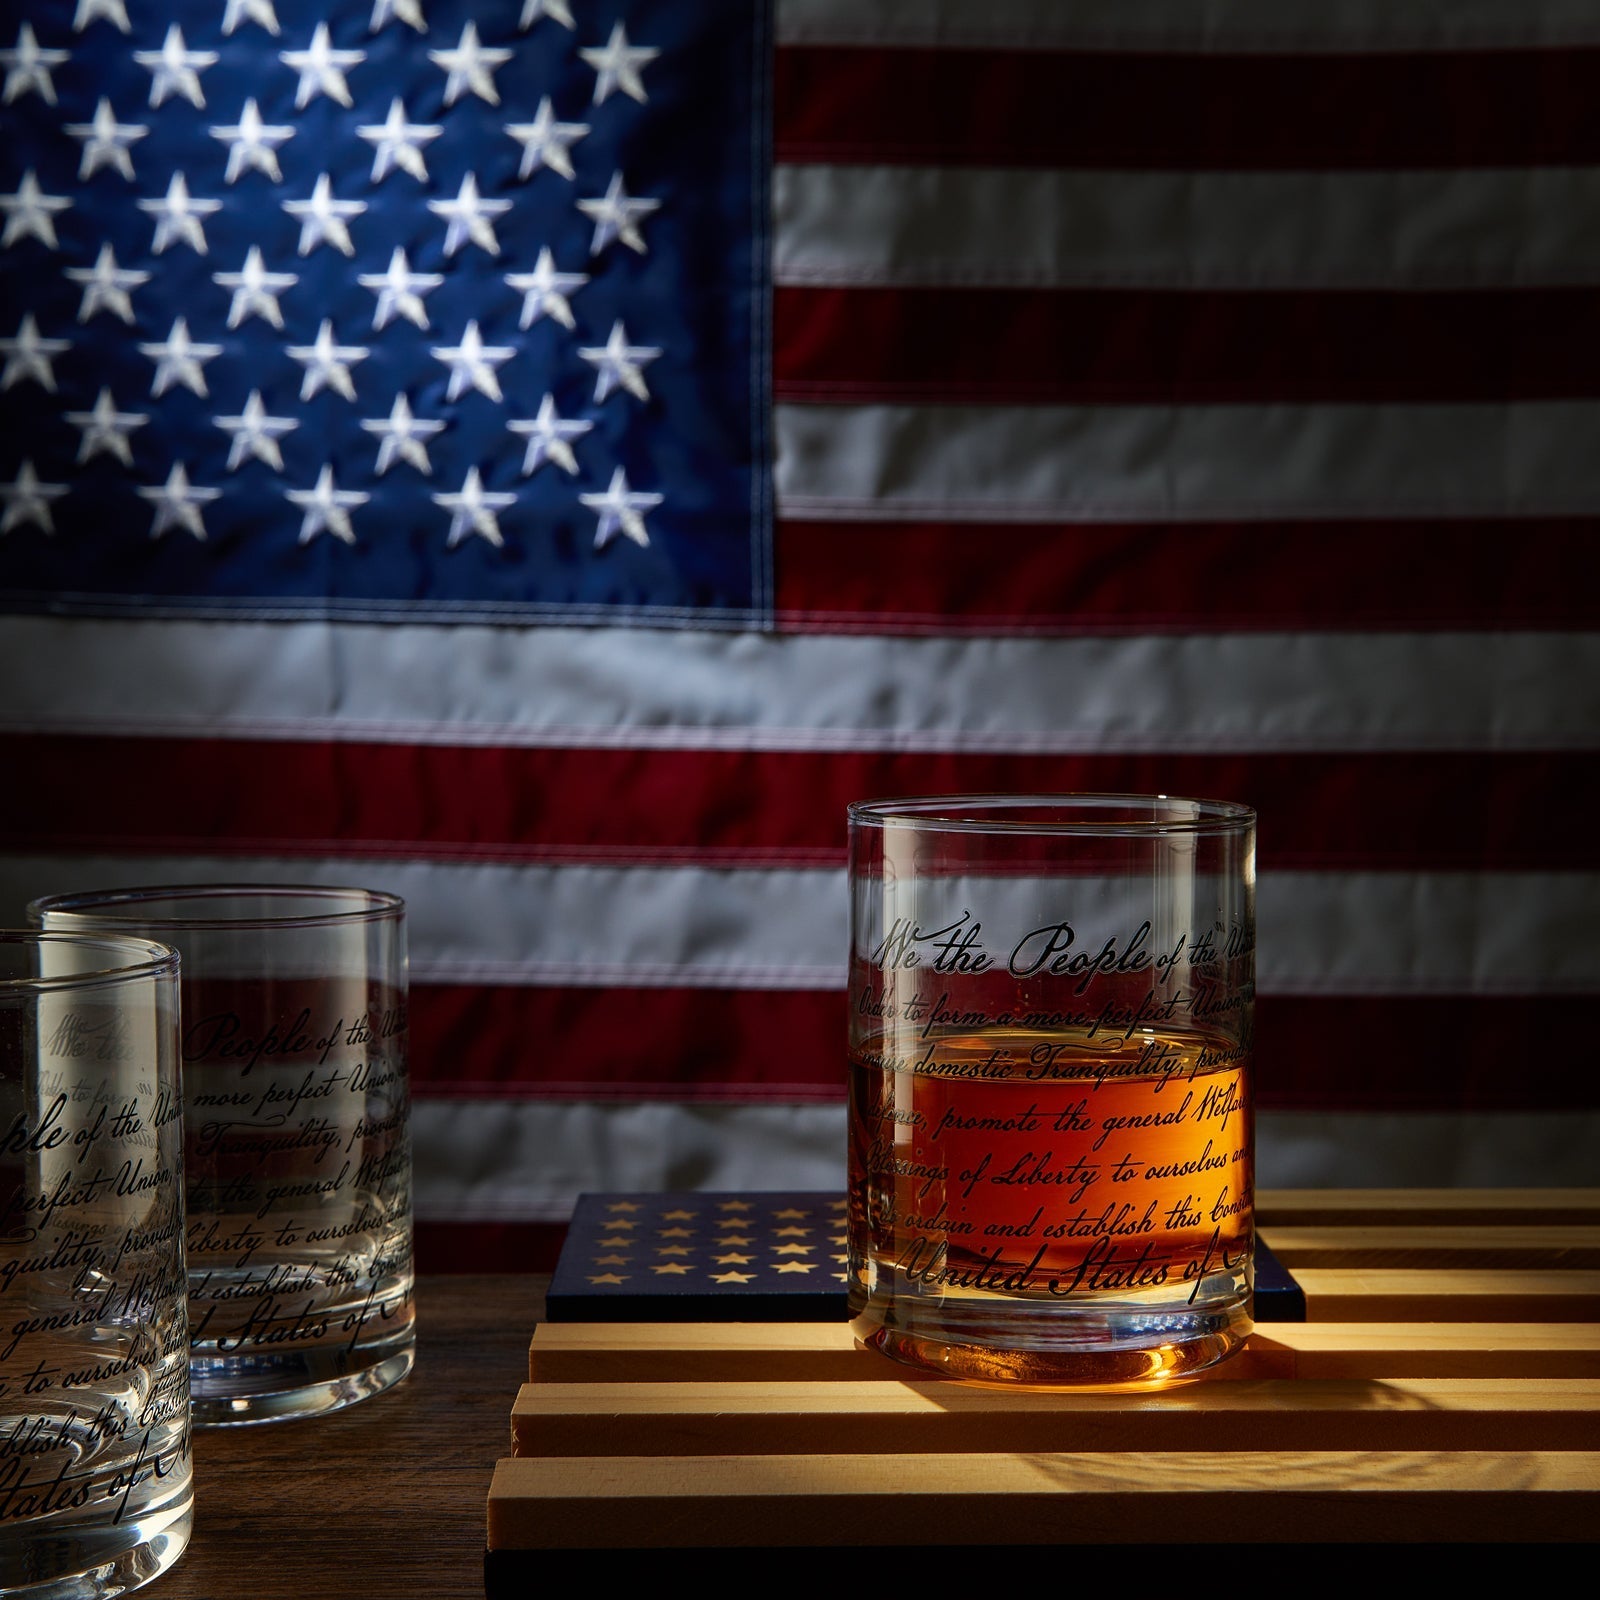 Whiskey Glasses – United States Constitution - Wood American Flag Tray & Set of 4 We The People 10oz America Glassware, Old Fashioned Rocks Glass, Freedom Of Speech Law Gift Set US Patriotic-1